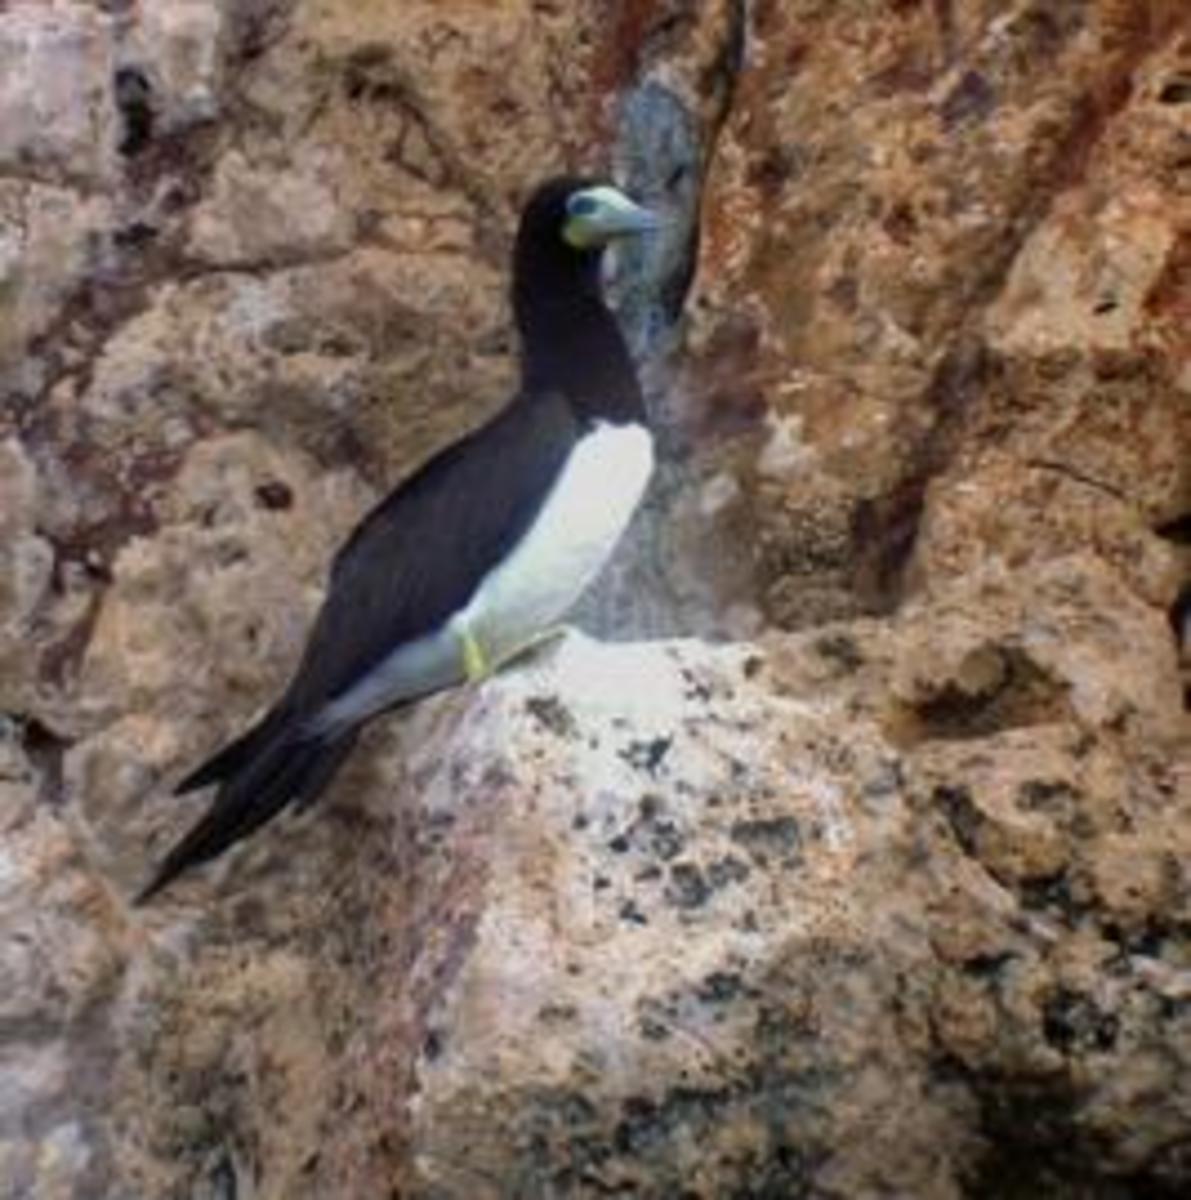 The source of Guano.  One of the many birds on the guano island of Navassa in the Caribbean Sea.  Guano is the end result of the accumulation of thousands of years worth of bird droppings.